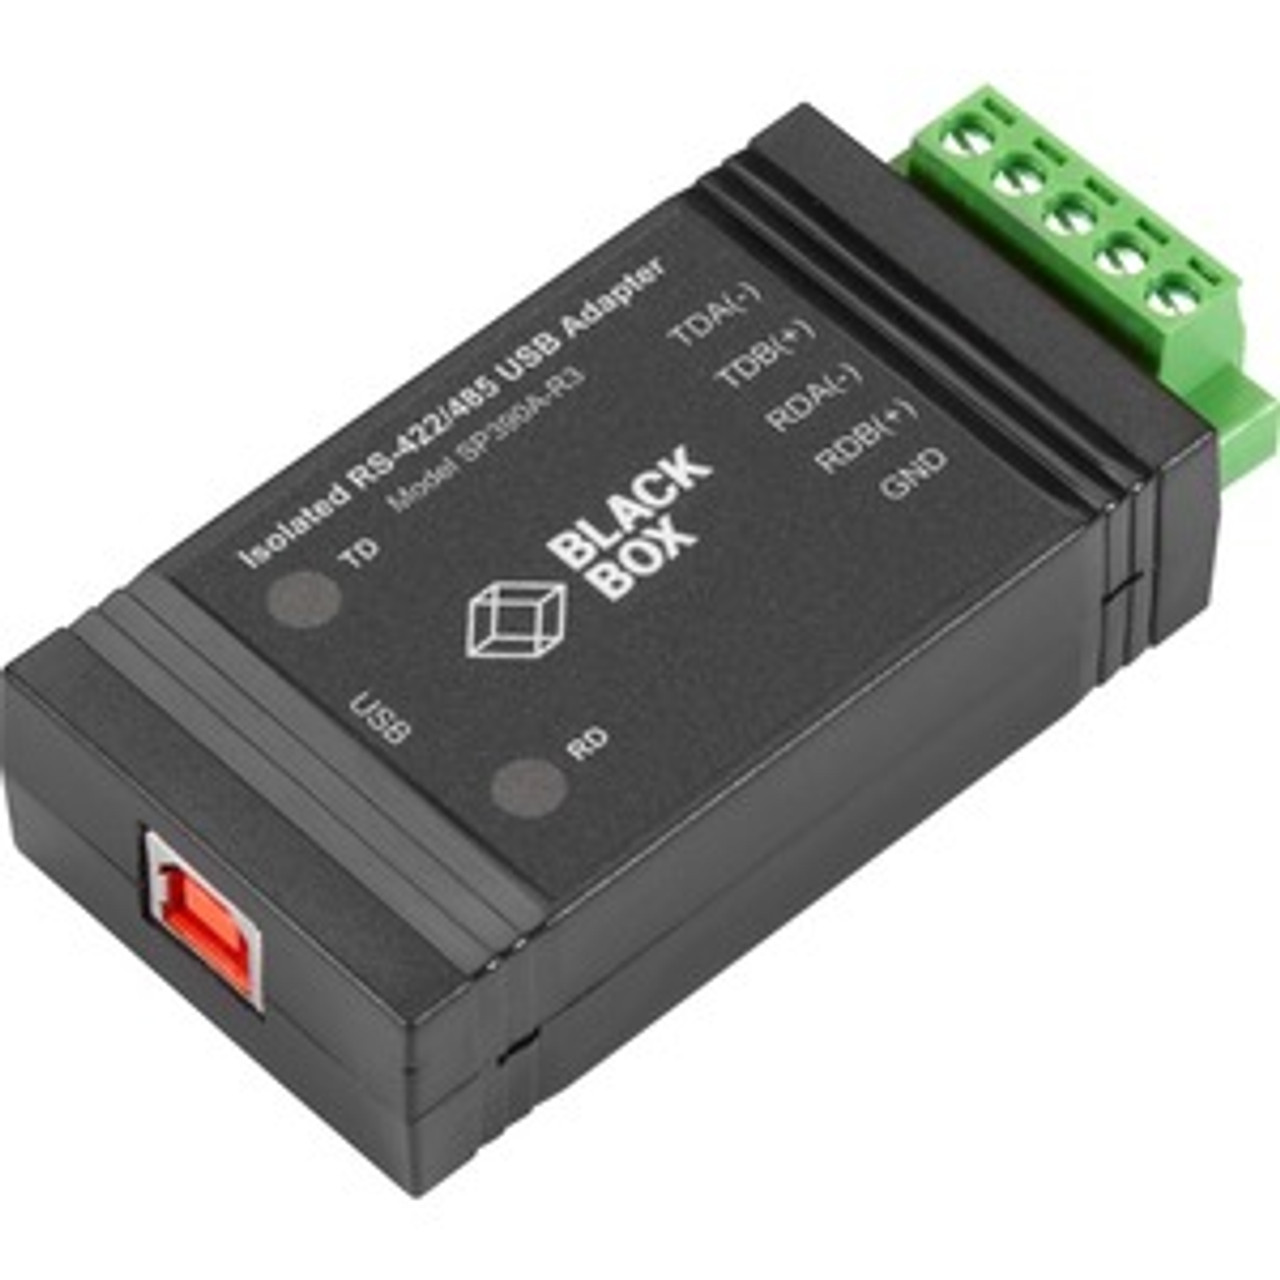 SP390A-R3 Black Box USB to RS422/485 Converter with Opto-Isolation